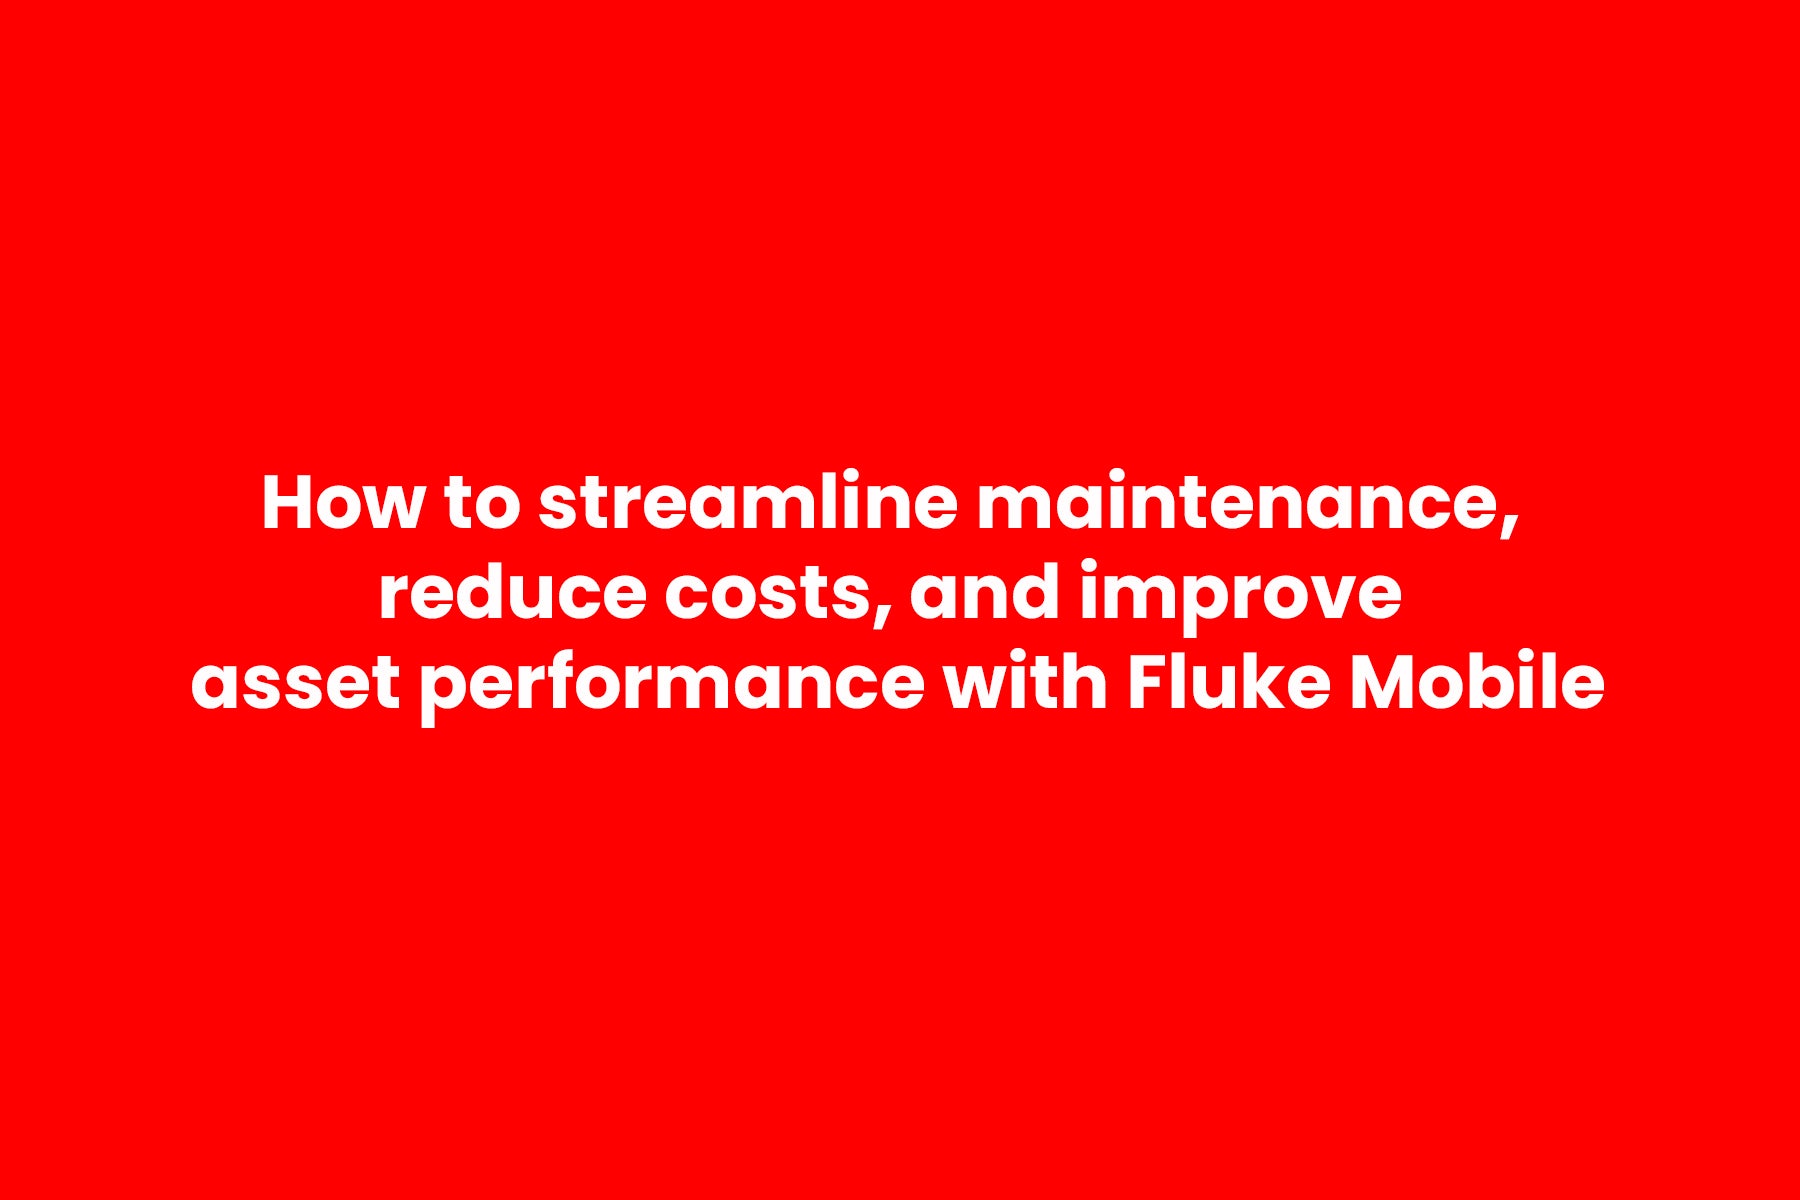 Optimize Equipment Maintenance, Cut Costs, and Boost Performance with Fluke Mobile